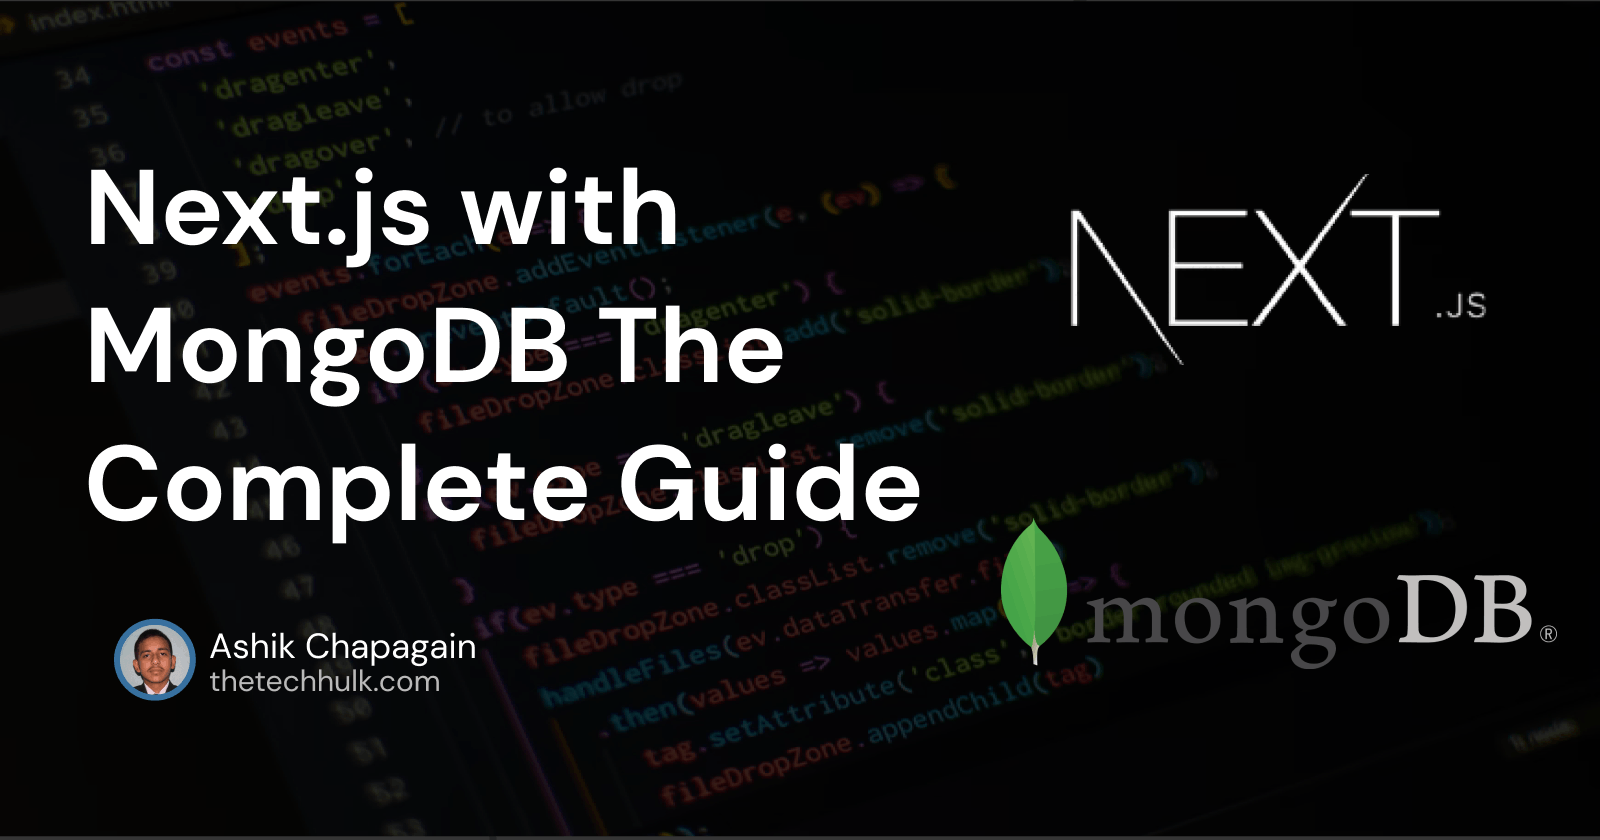 Next.js with MongoDB - The Complete Guide